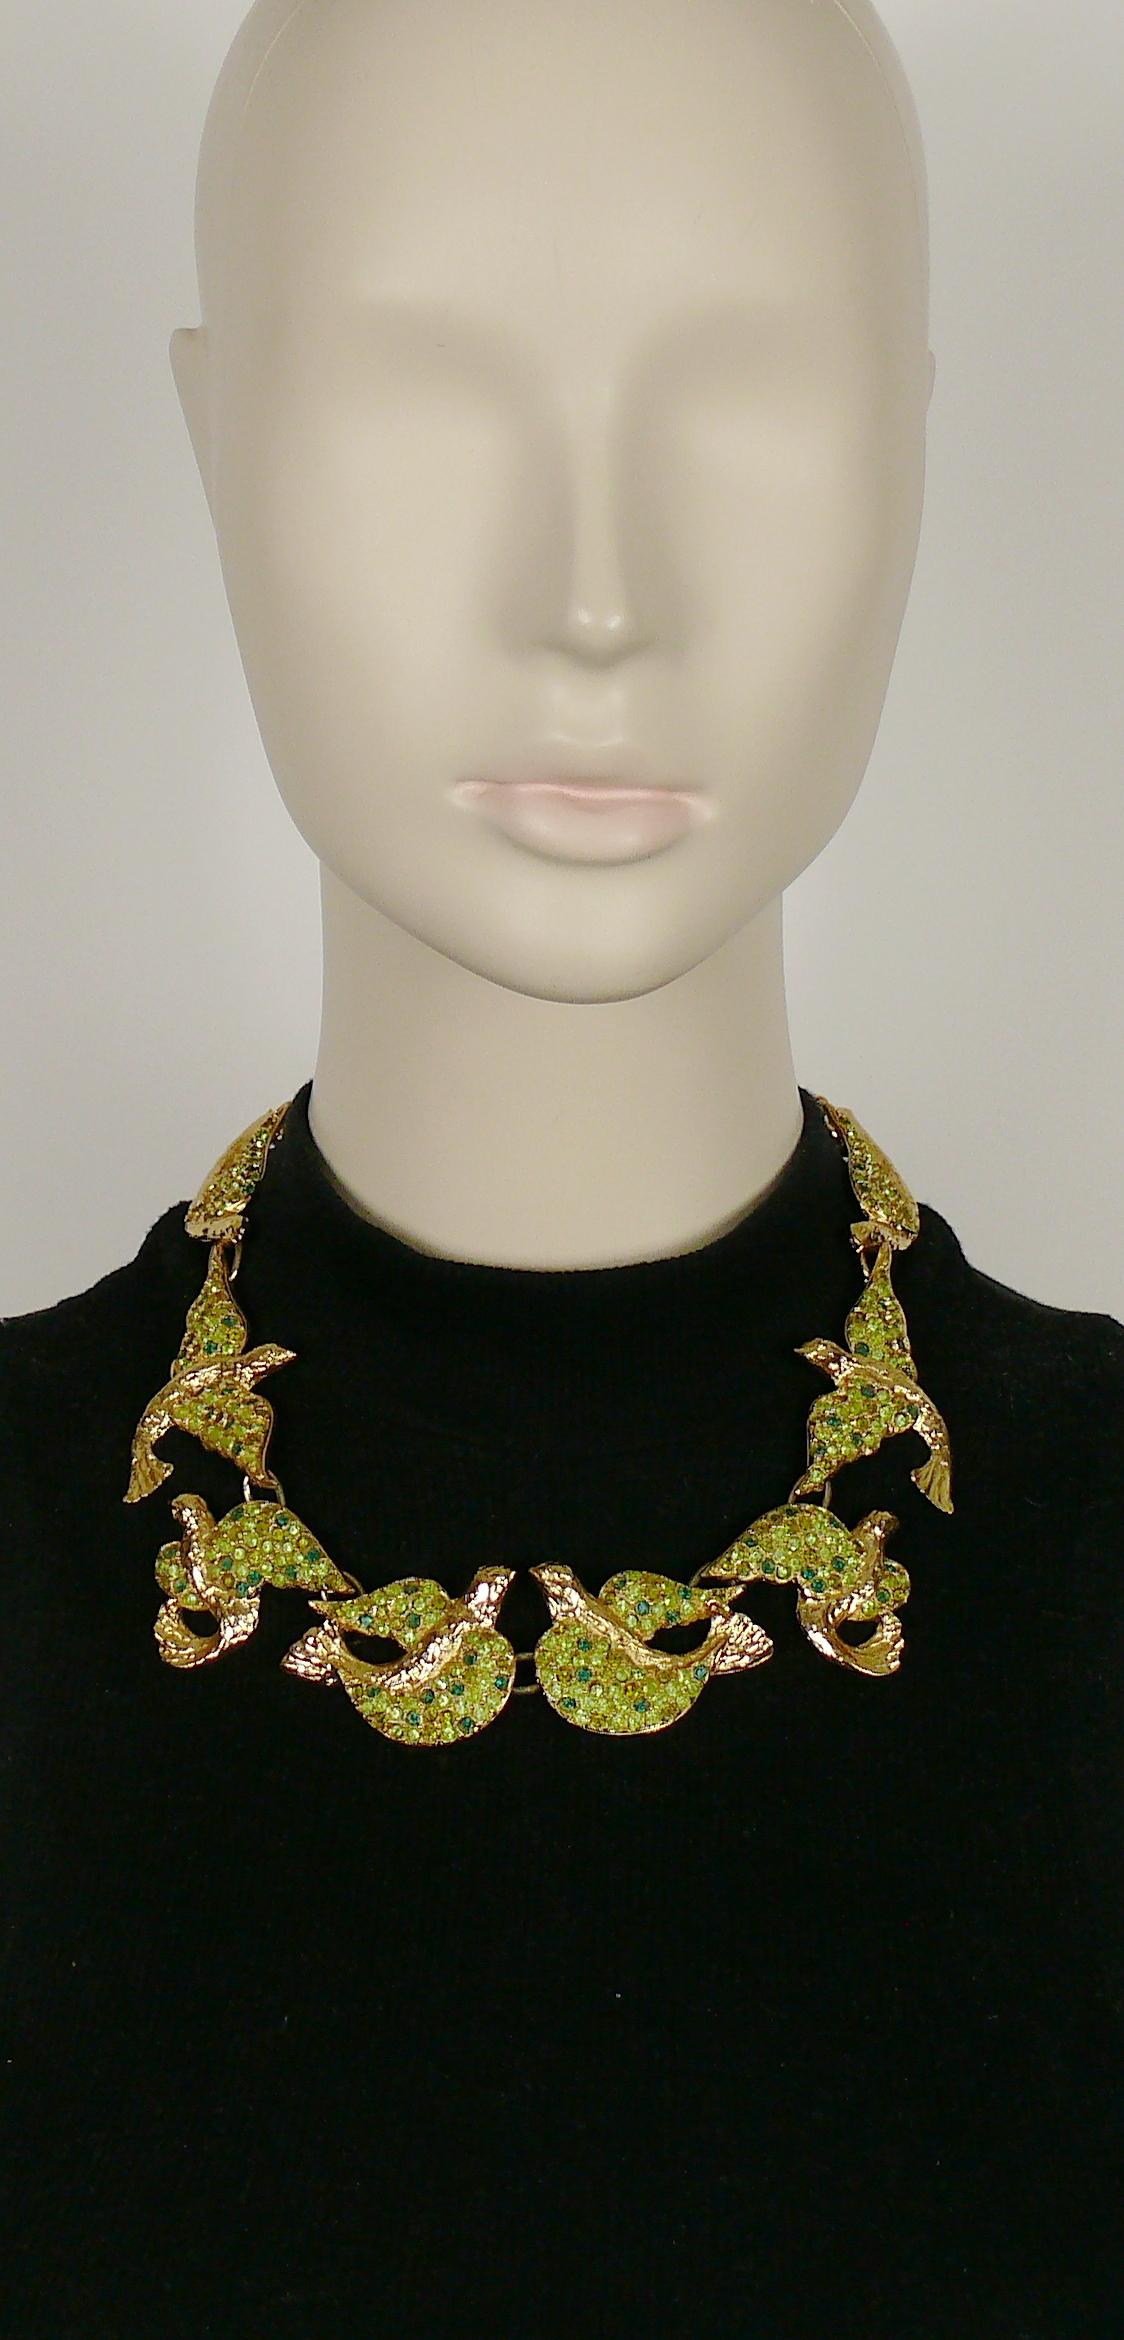 YVES SAINT LAURENT vintage rare gold toned necklace featuring bird links embellished with green shade crystals.

Lobster clasp closure.
Adjustable length.

Embossed YSL Made in France.

Indicative measurements : adjustable length from approx. 43 cm